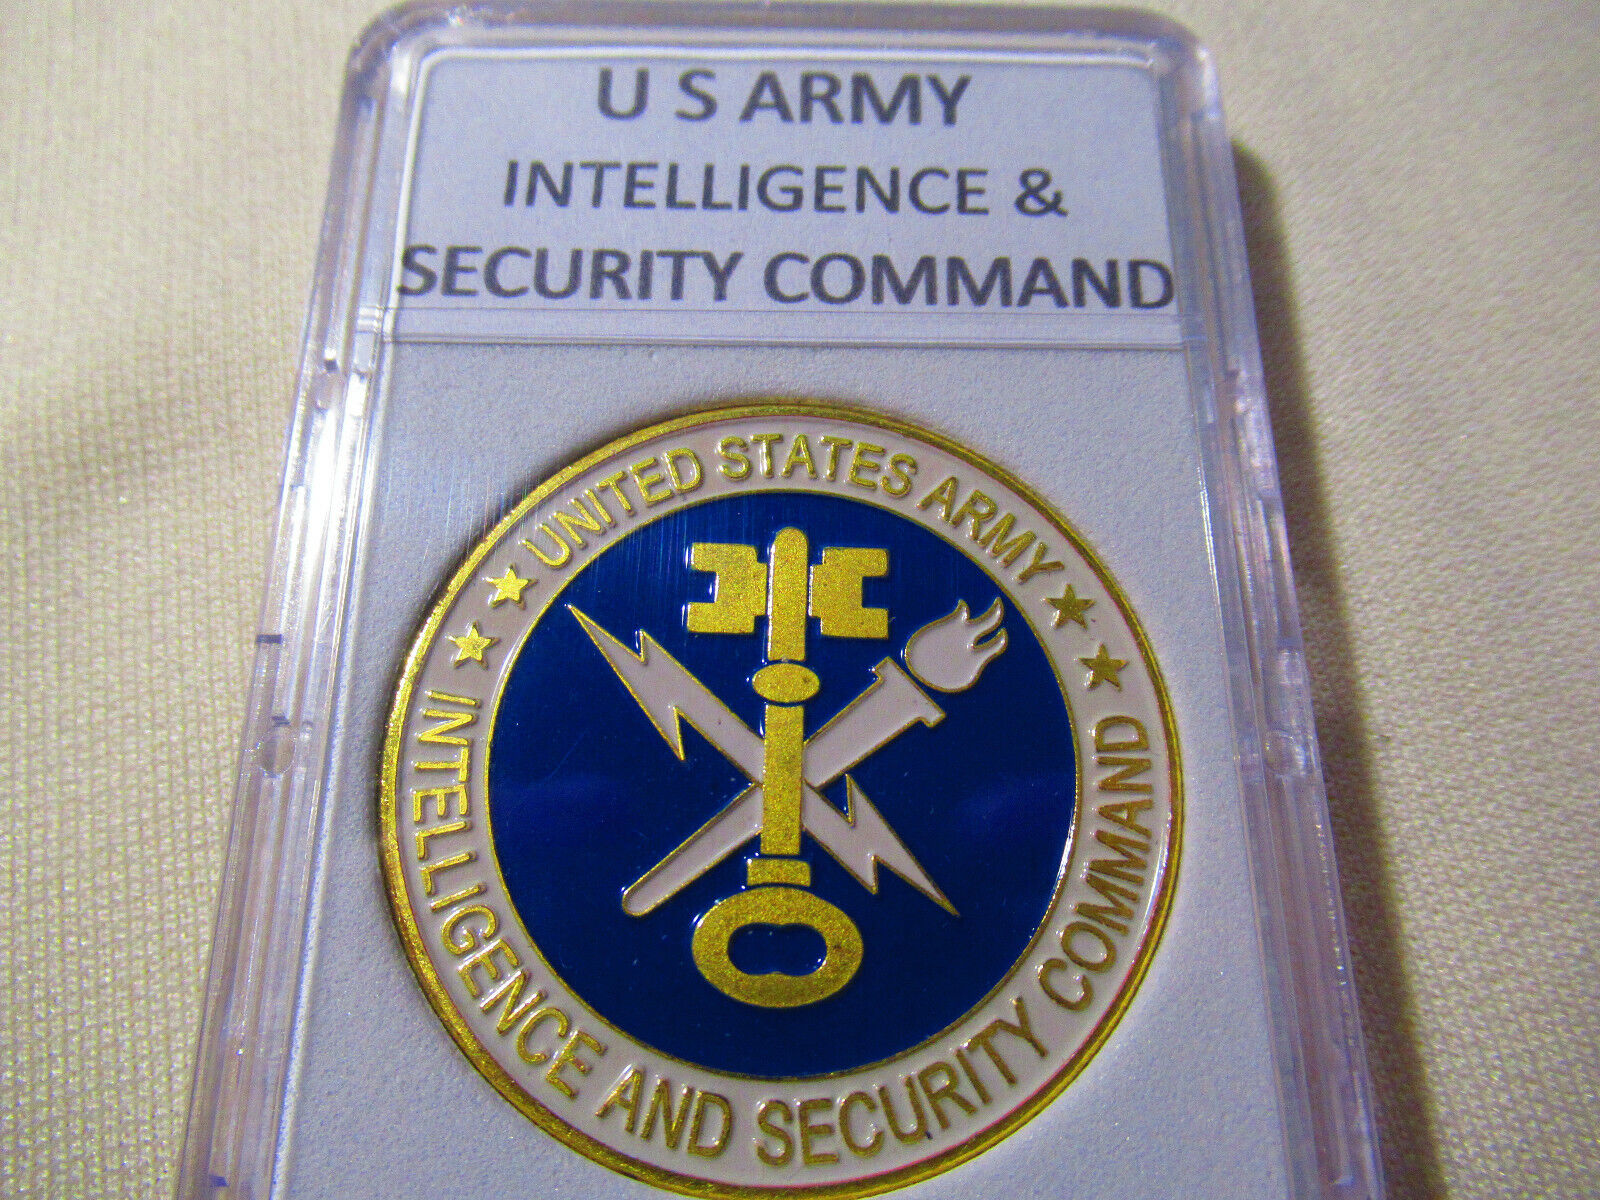 U S ARMY INTELLIGENCE & SECURITY COMMAND (INSCOM) Challenge Coin 